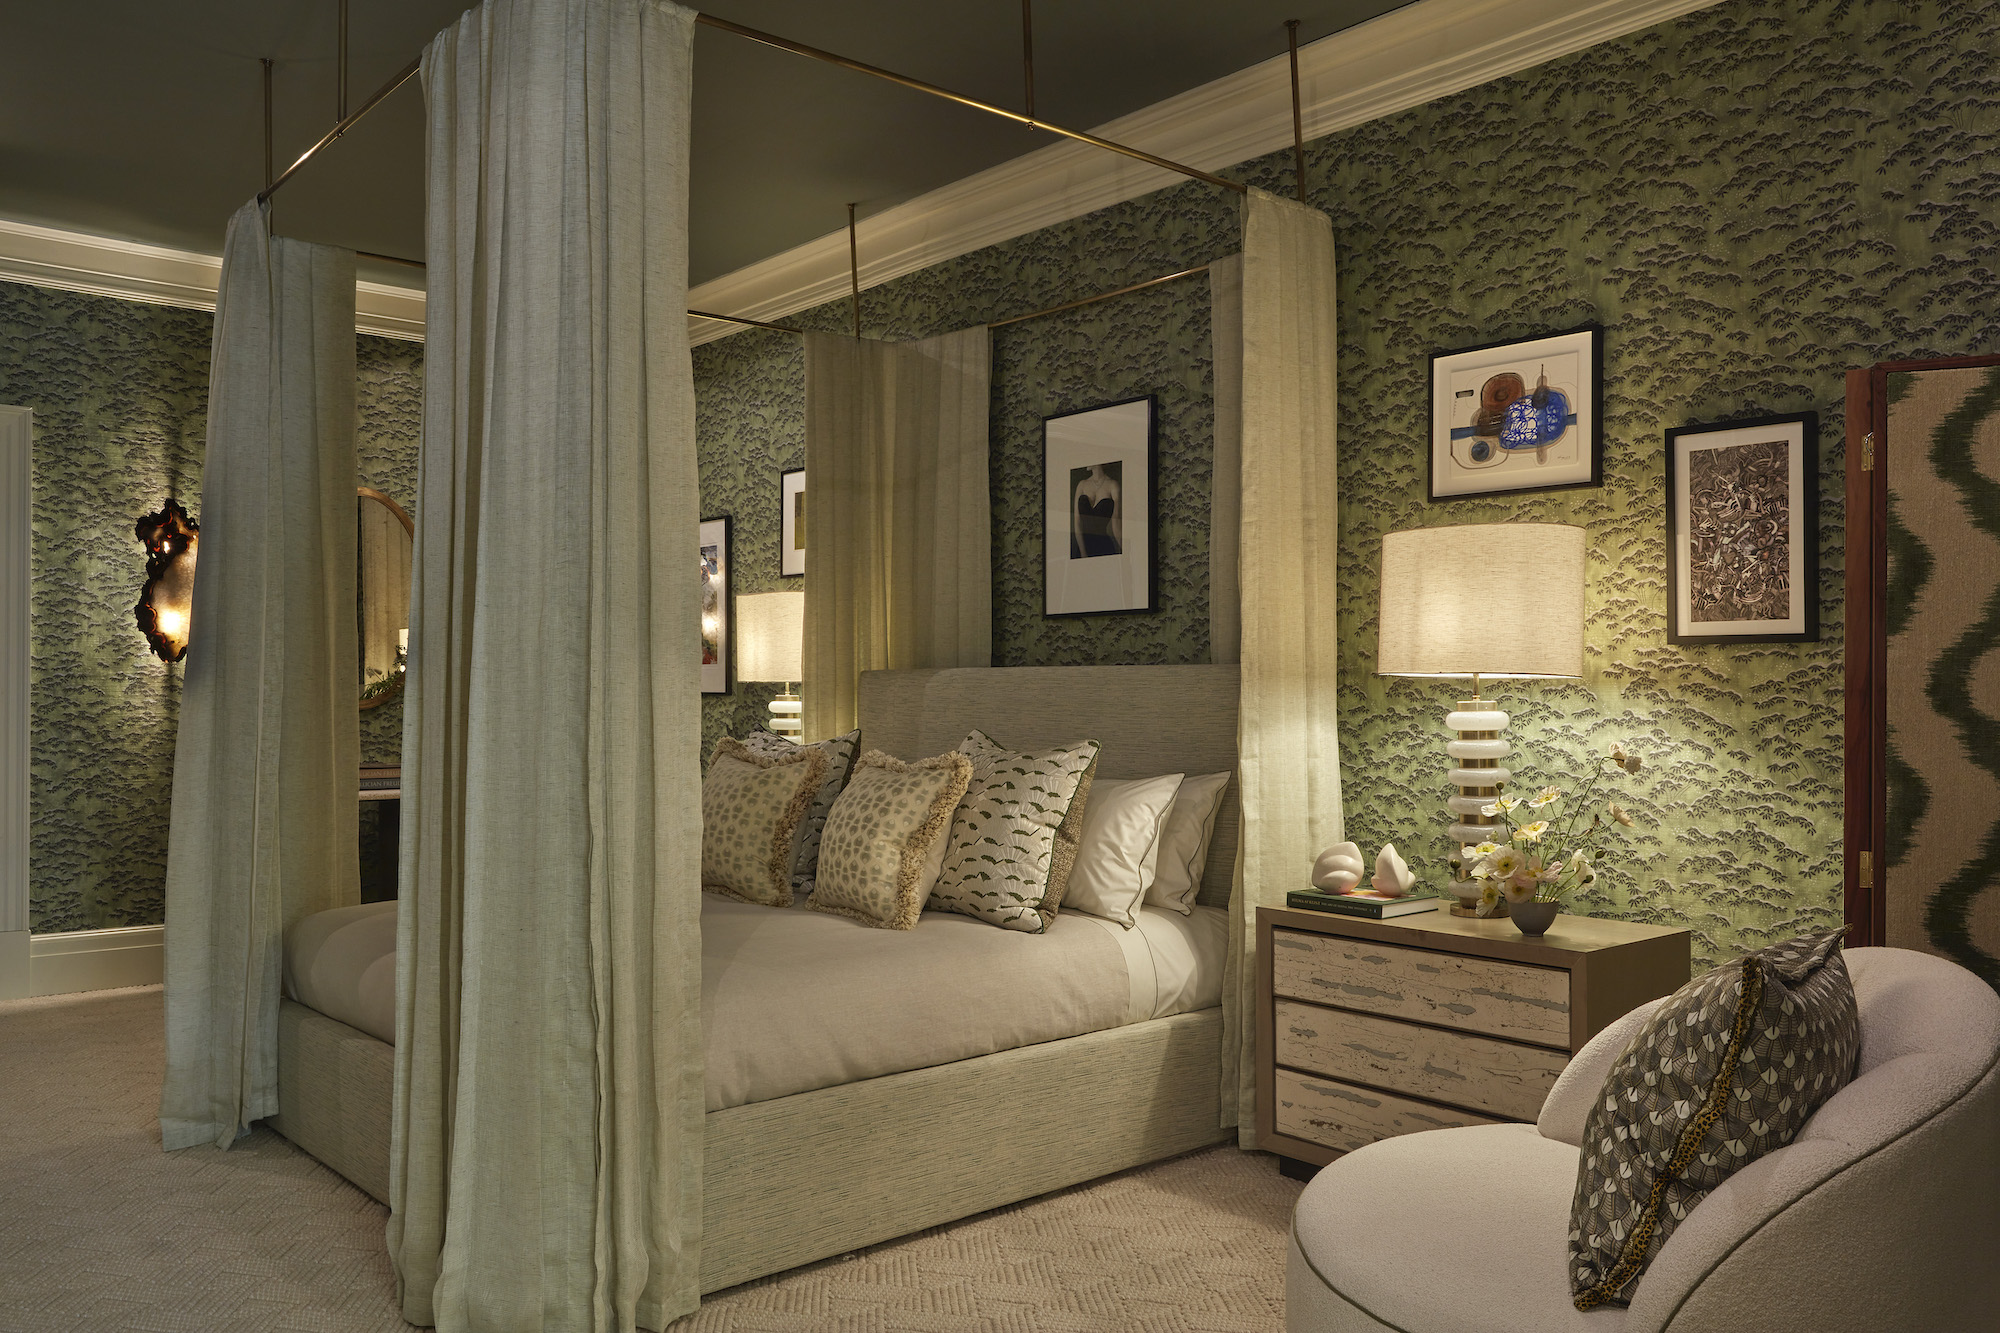 Natalia Miyar created a stunning green bedroom with her characteristic flair for wallpaper and colour at WOW!house 2023 in Effect Magazine